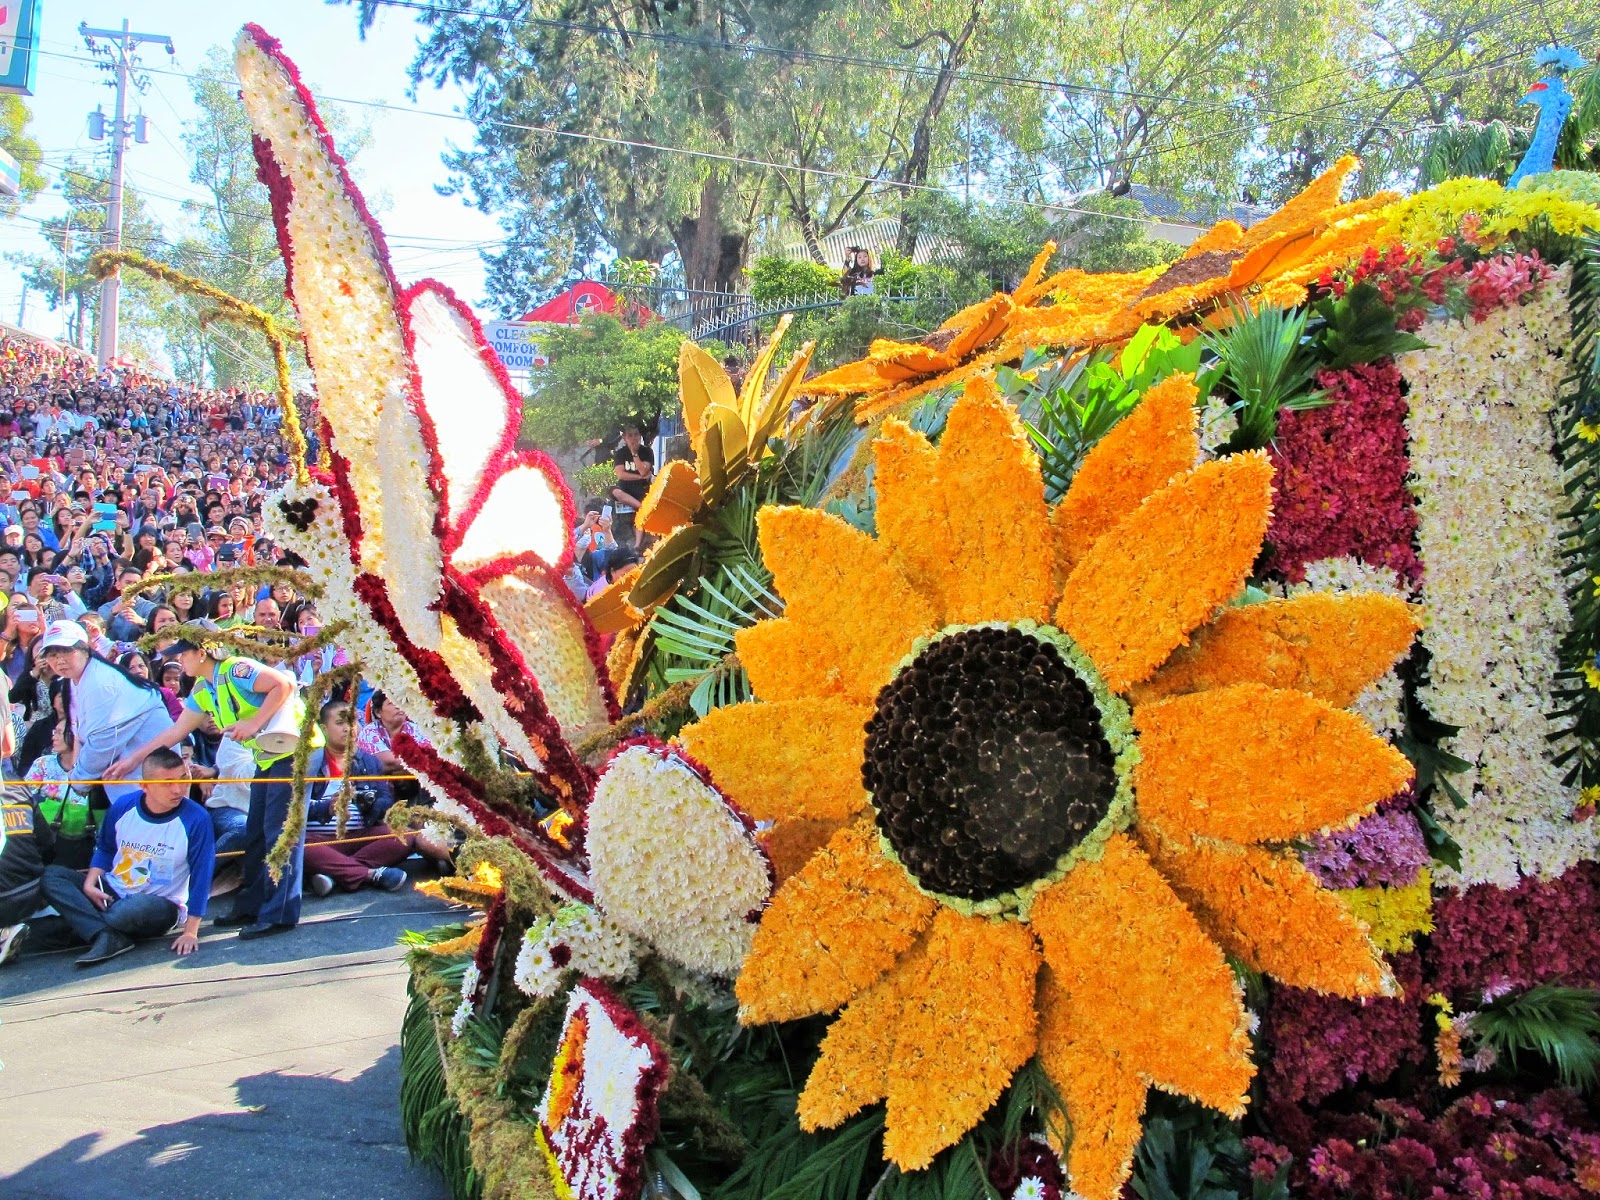 Gridcrosser: Abloom for Two Decades: The Panagbenga Flower Festival ...